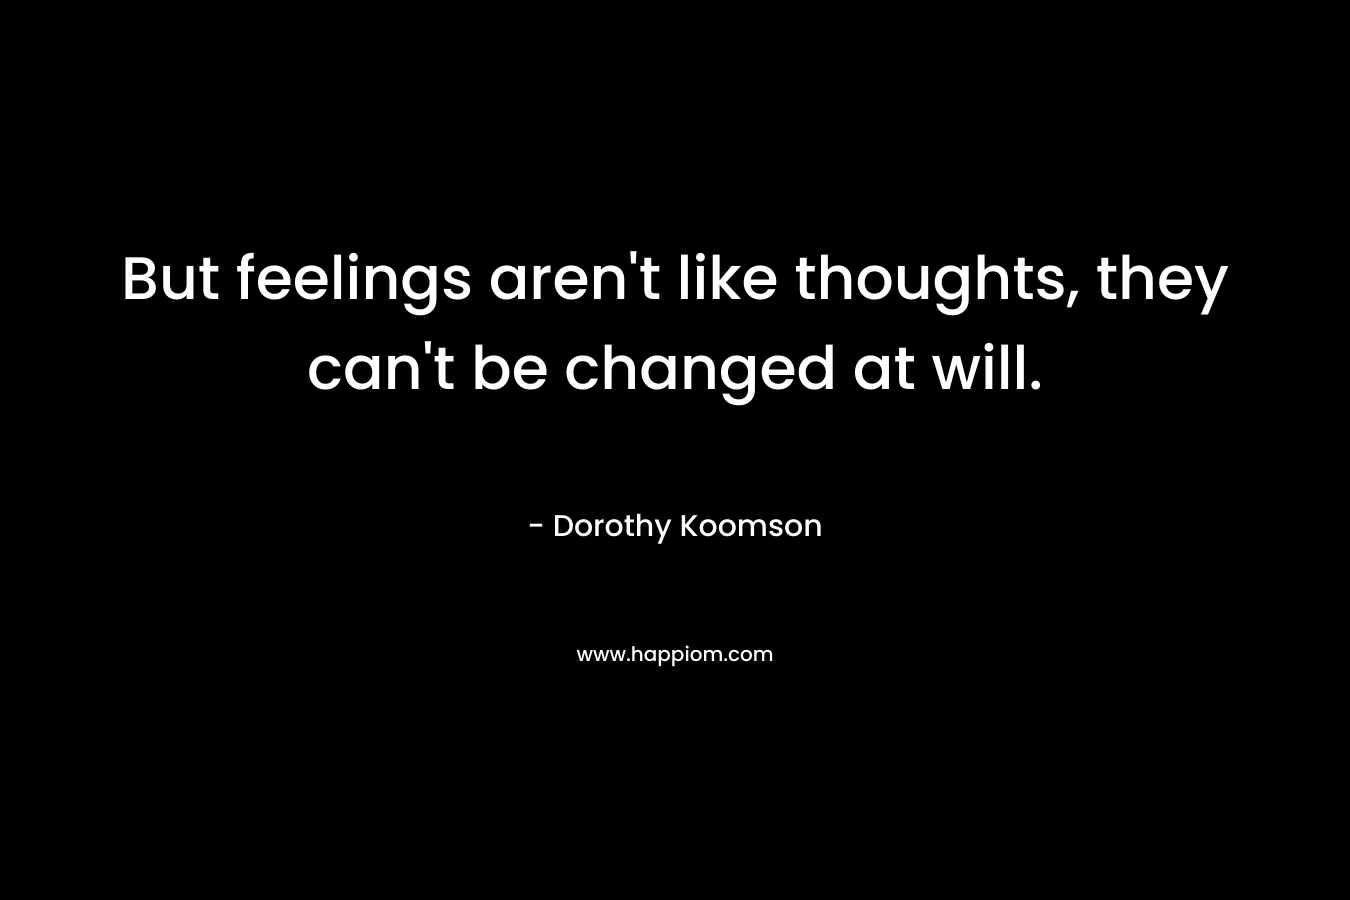 But feelings aren’t like thoughts, they can’t be changed at will. – Dorothy Koomson